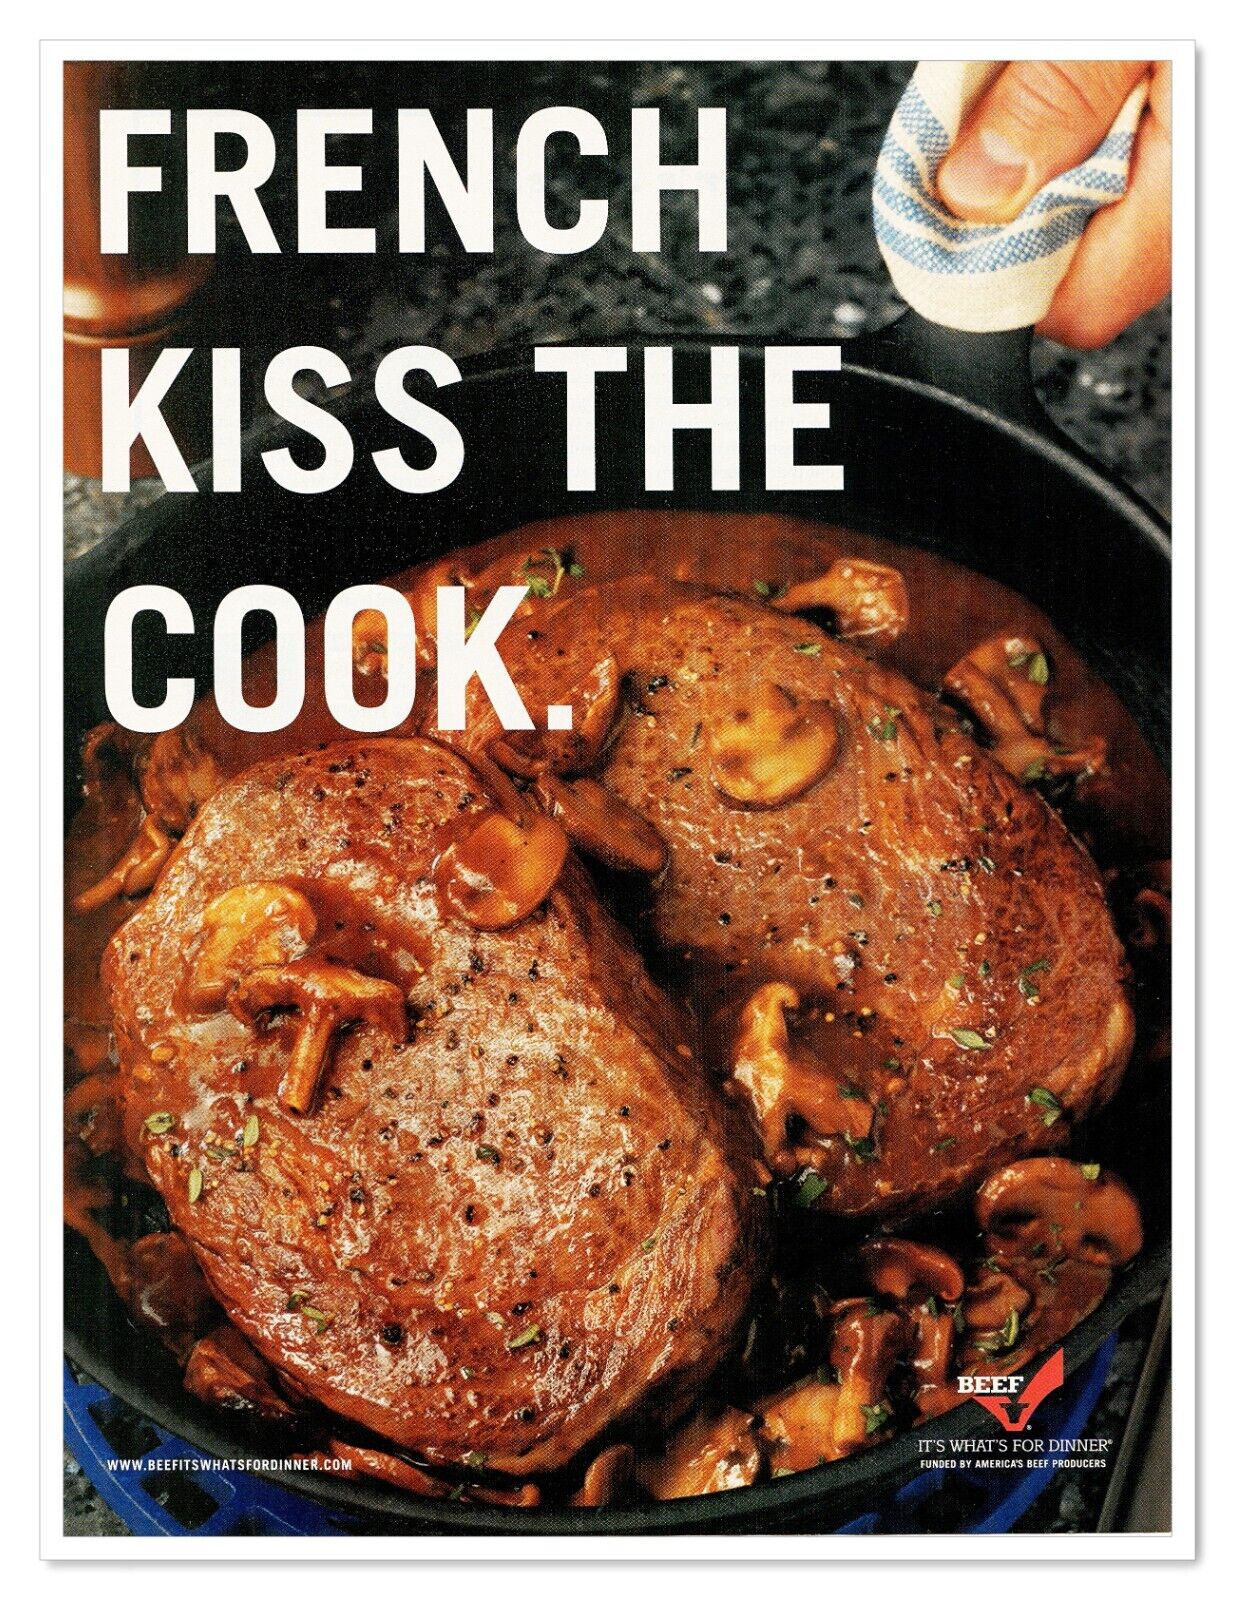 Beef It's What's for Dinner Kiss the Cook 2006 Full-Page Print Magazine Ad